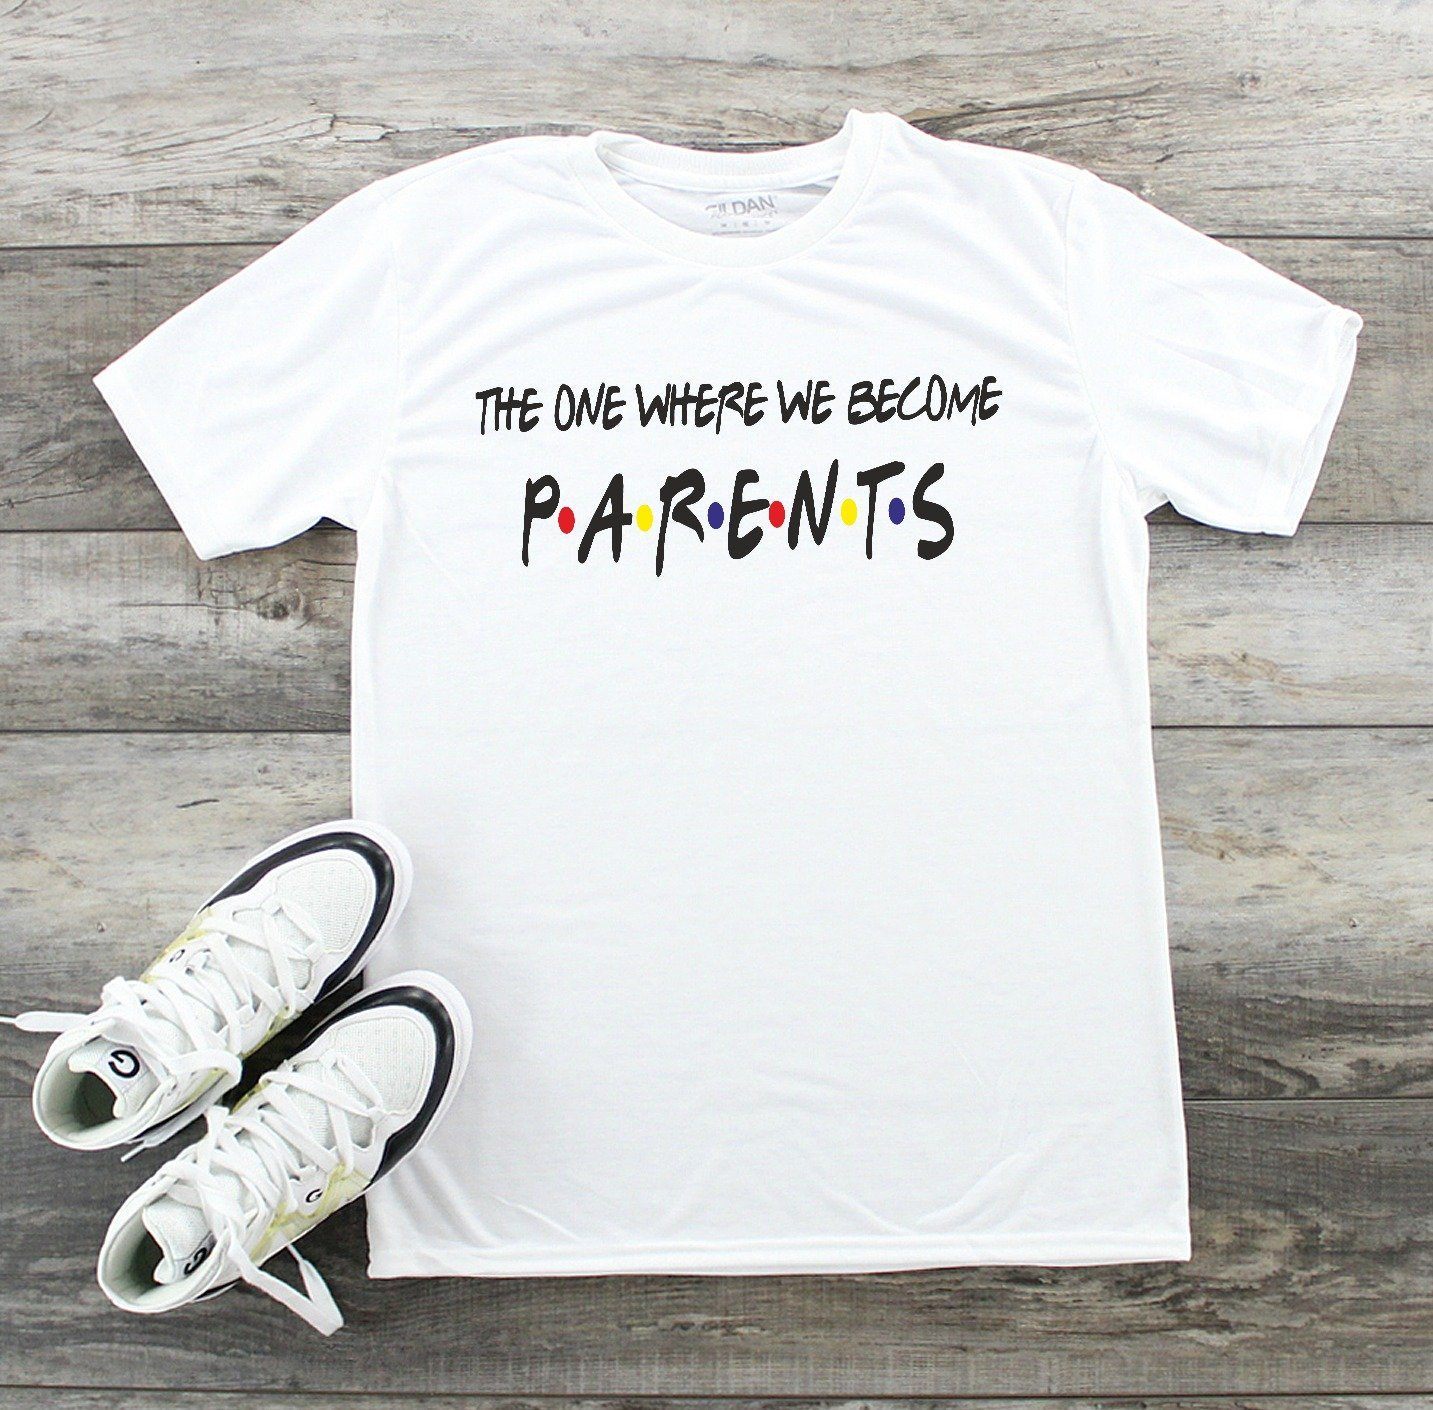 The One Where We Become Parents - Dad Shirt